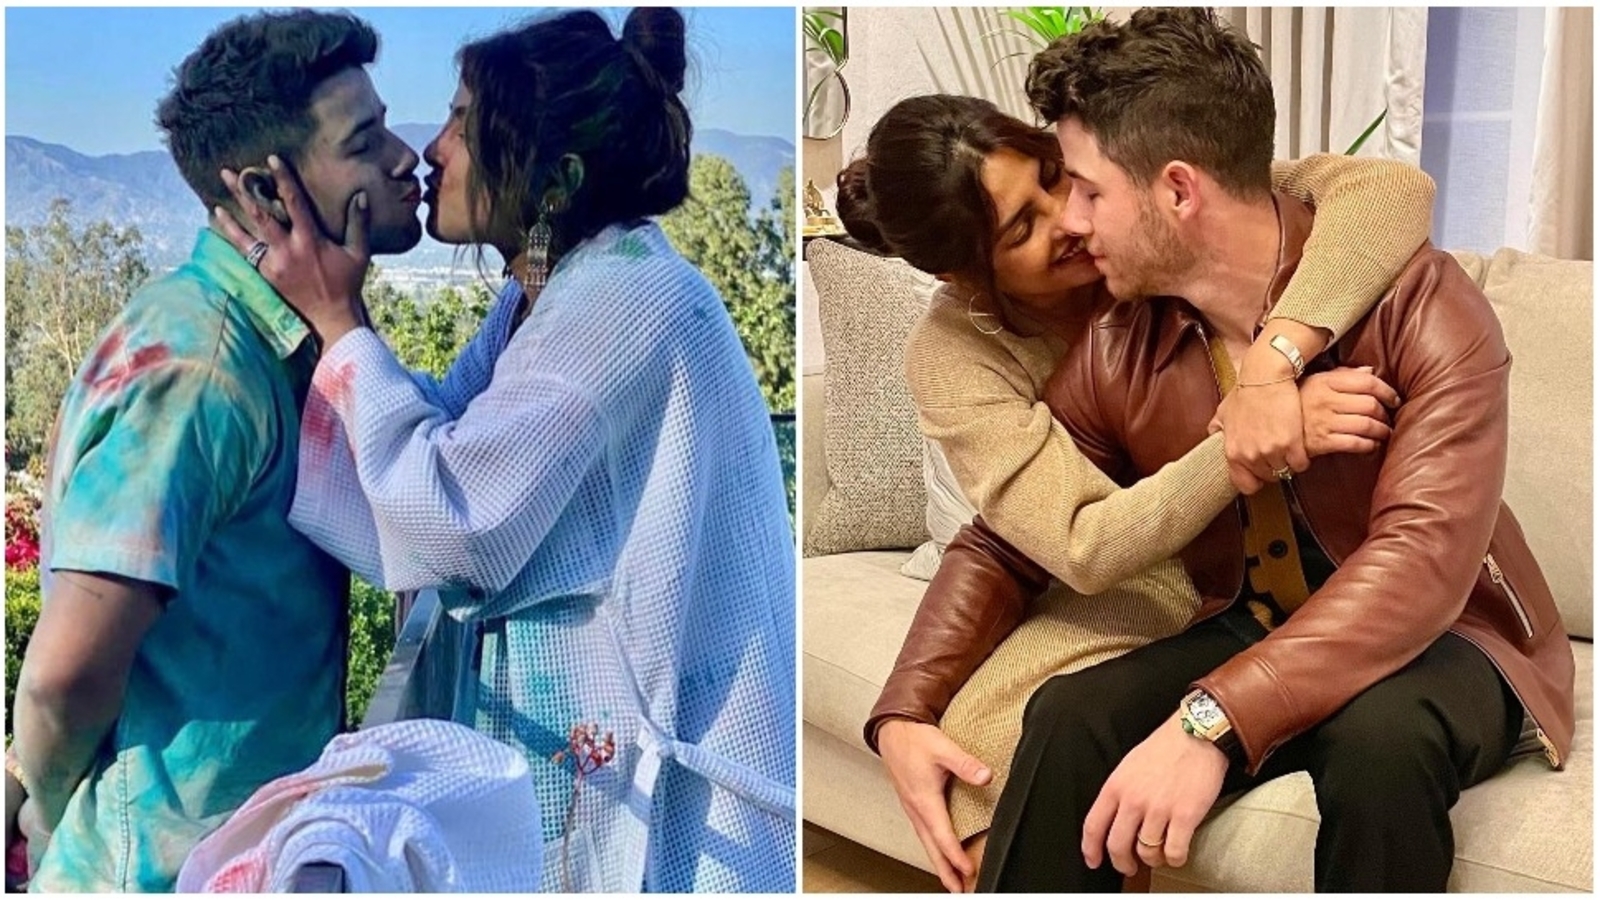 Priyanka Chopra, Nick Jonas share a kiss at lunch in Los Angeles, fan asks: ‘When are we going to see their daughter?’